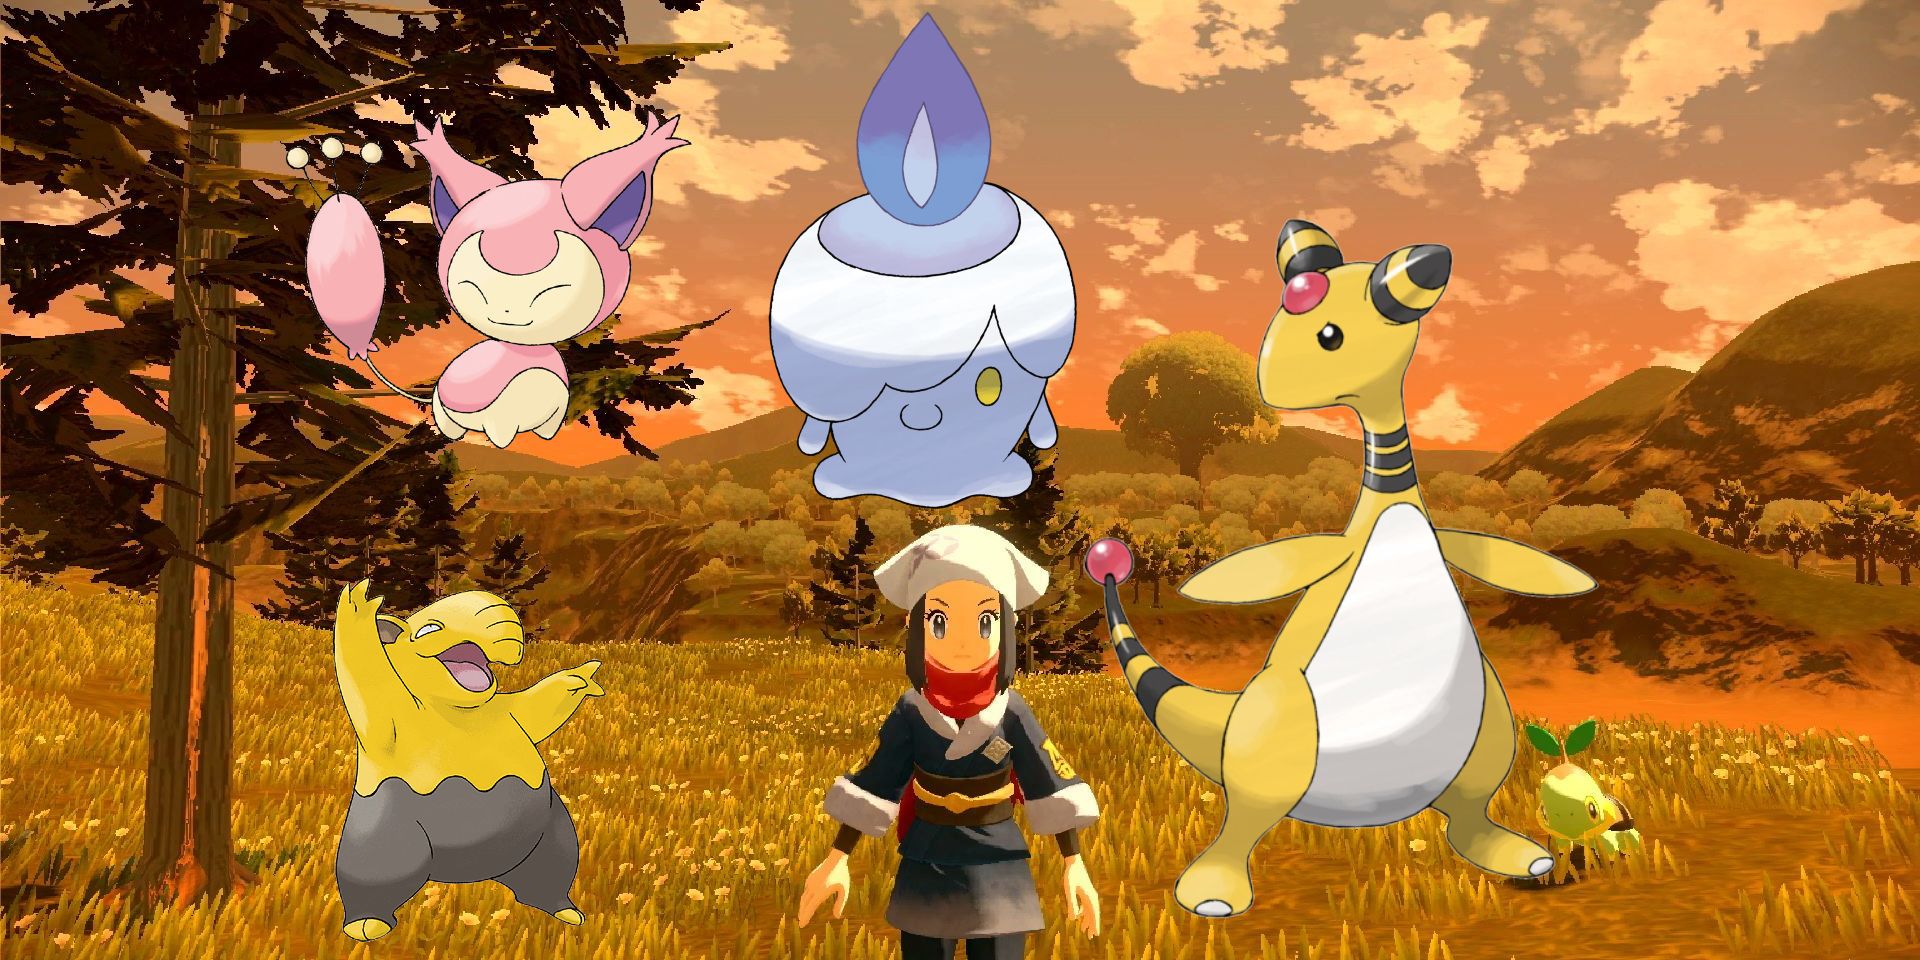 New Hisuian Forms In Pokemon Legends Arceus DLC We Want To See Drowzee Skitty Litwick and Ampharos